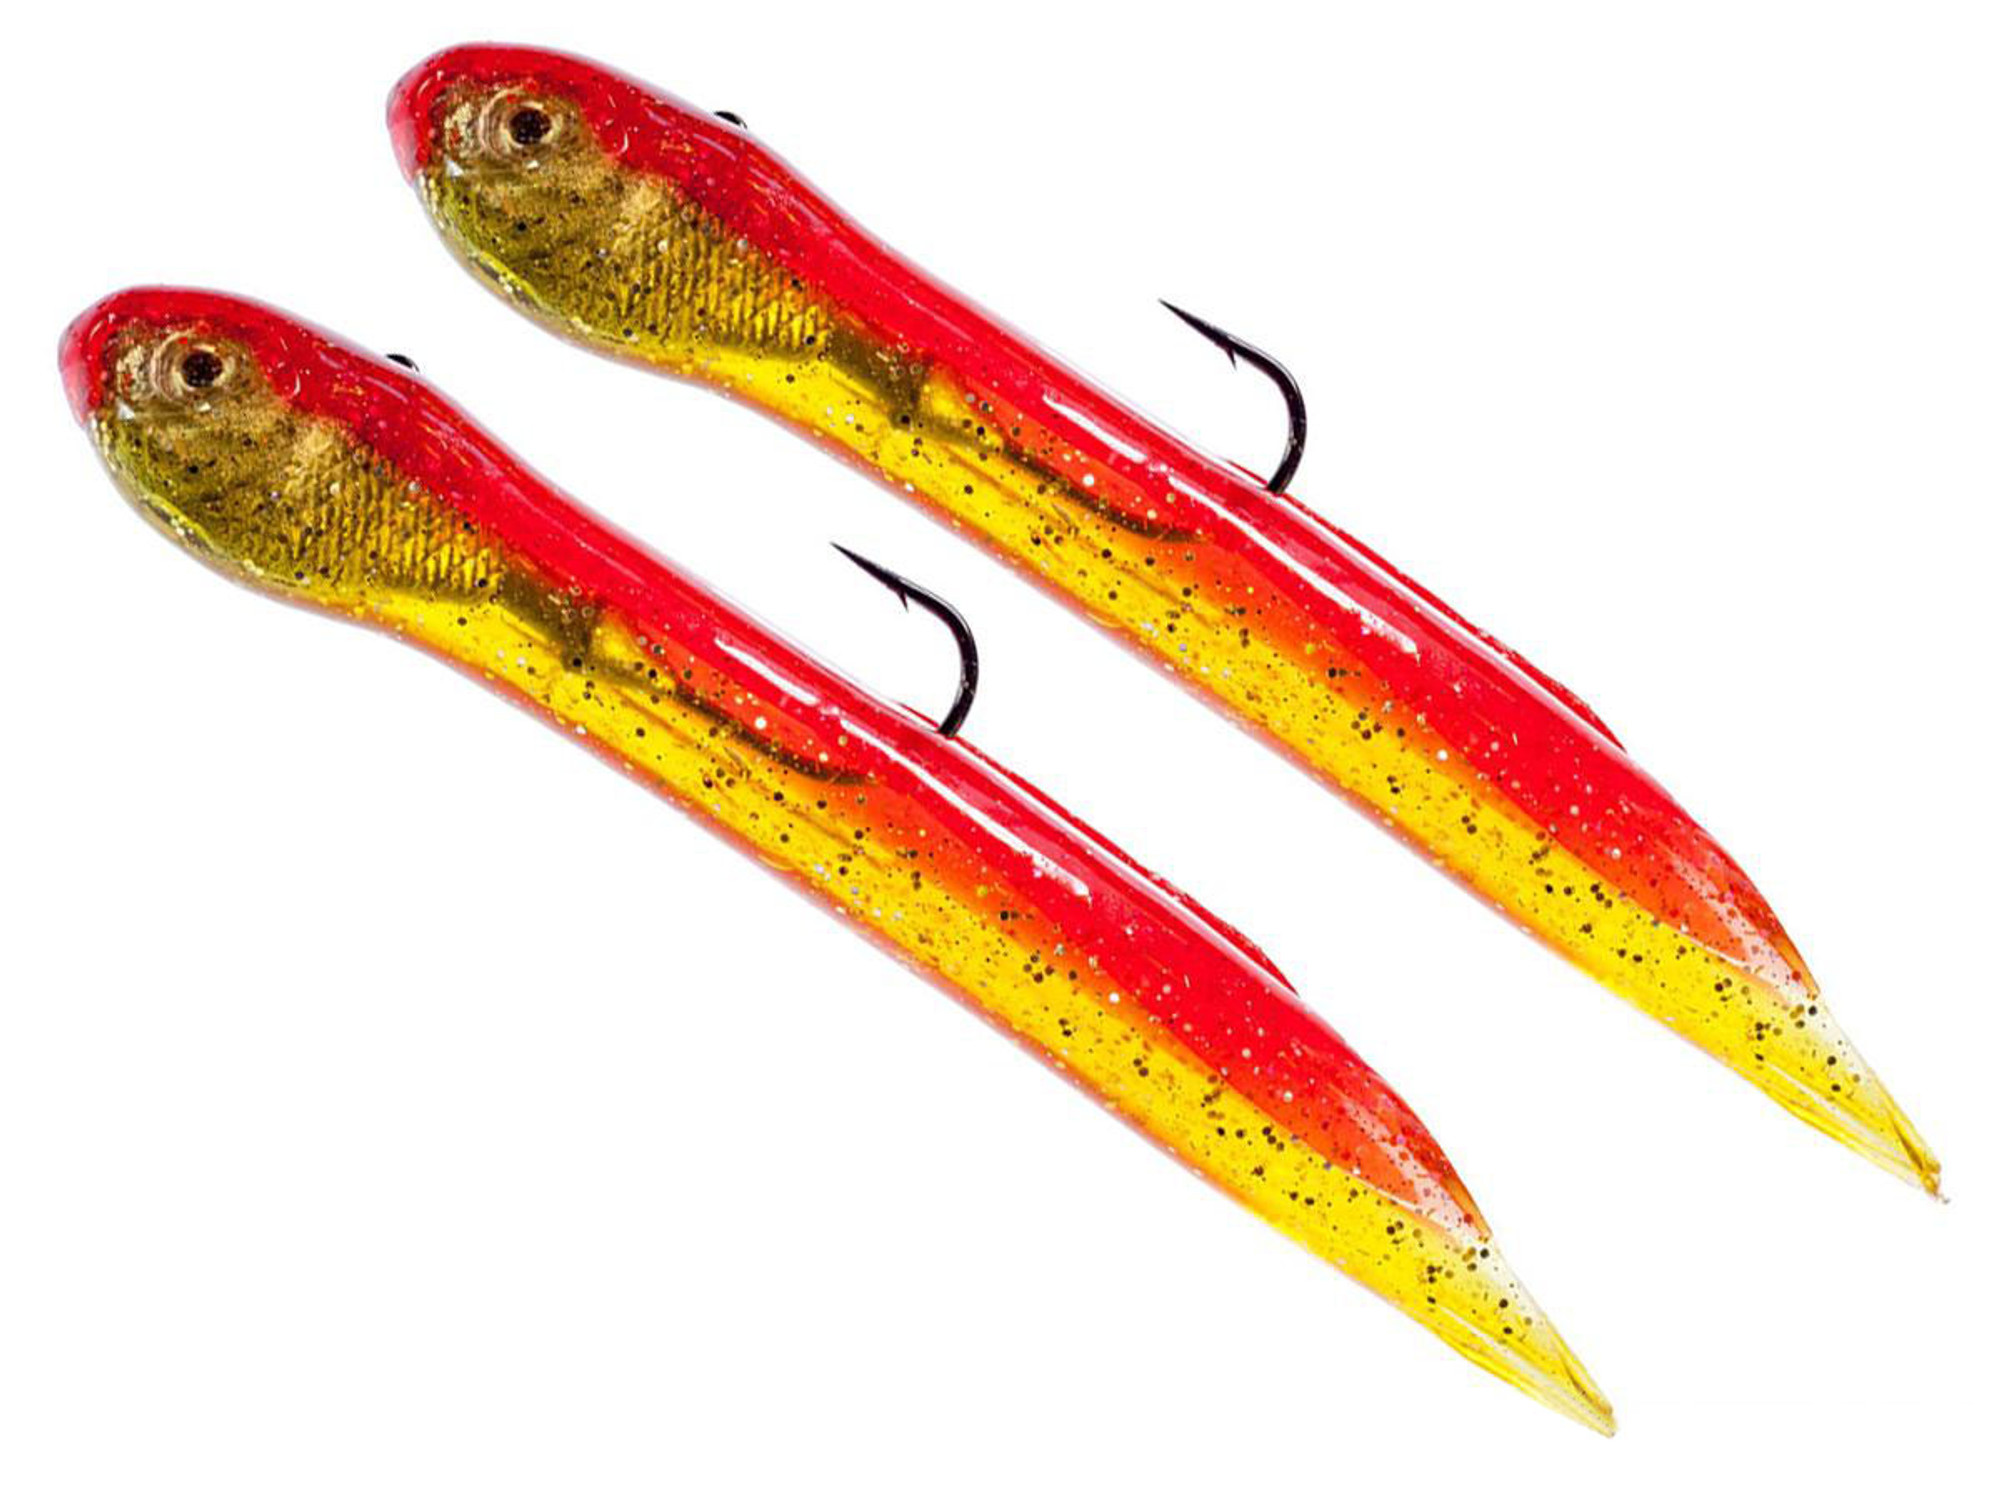 Hook Up Baits Handcrafted Soft Fishing Jigs - Red Crab / 4" / 1 oz